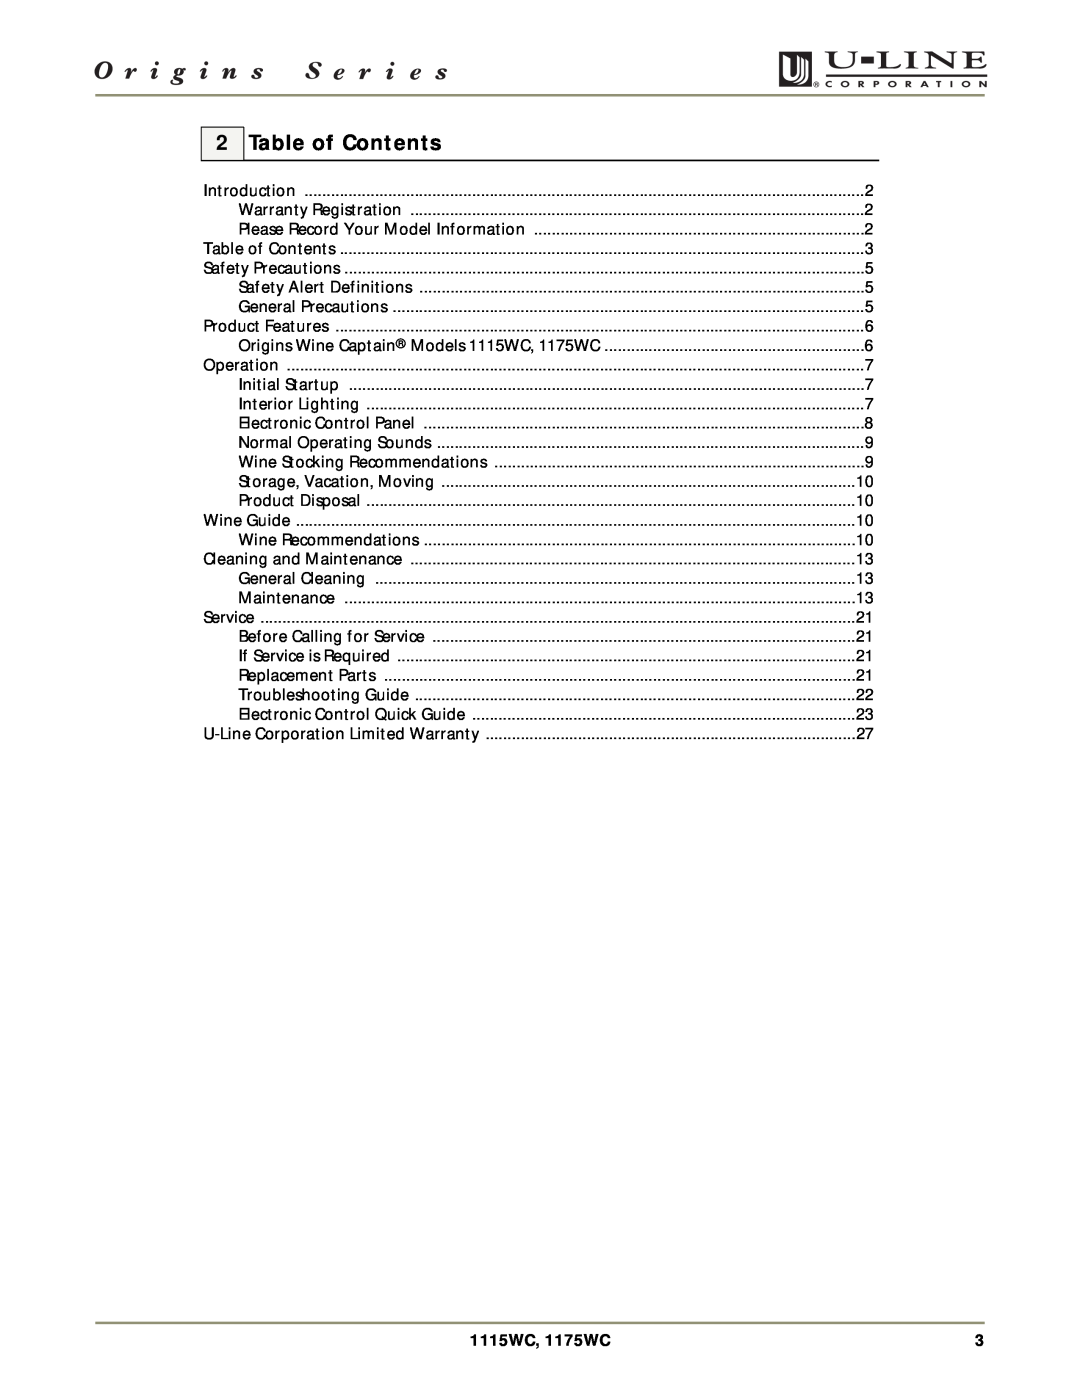 U-Line manual Table of Contents, 1115WC, 1175WC 